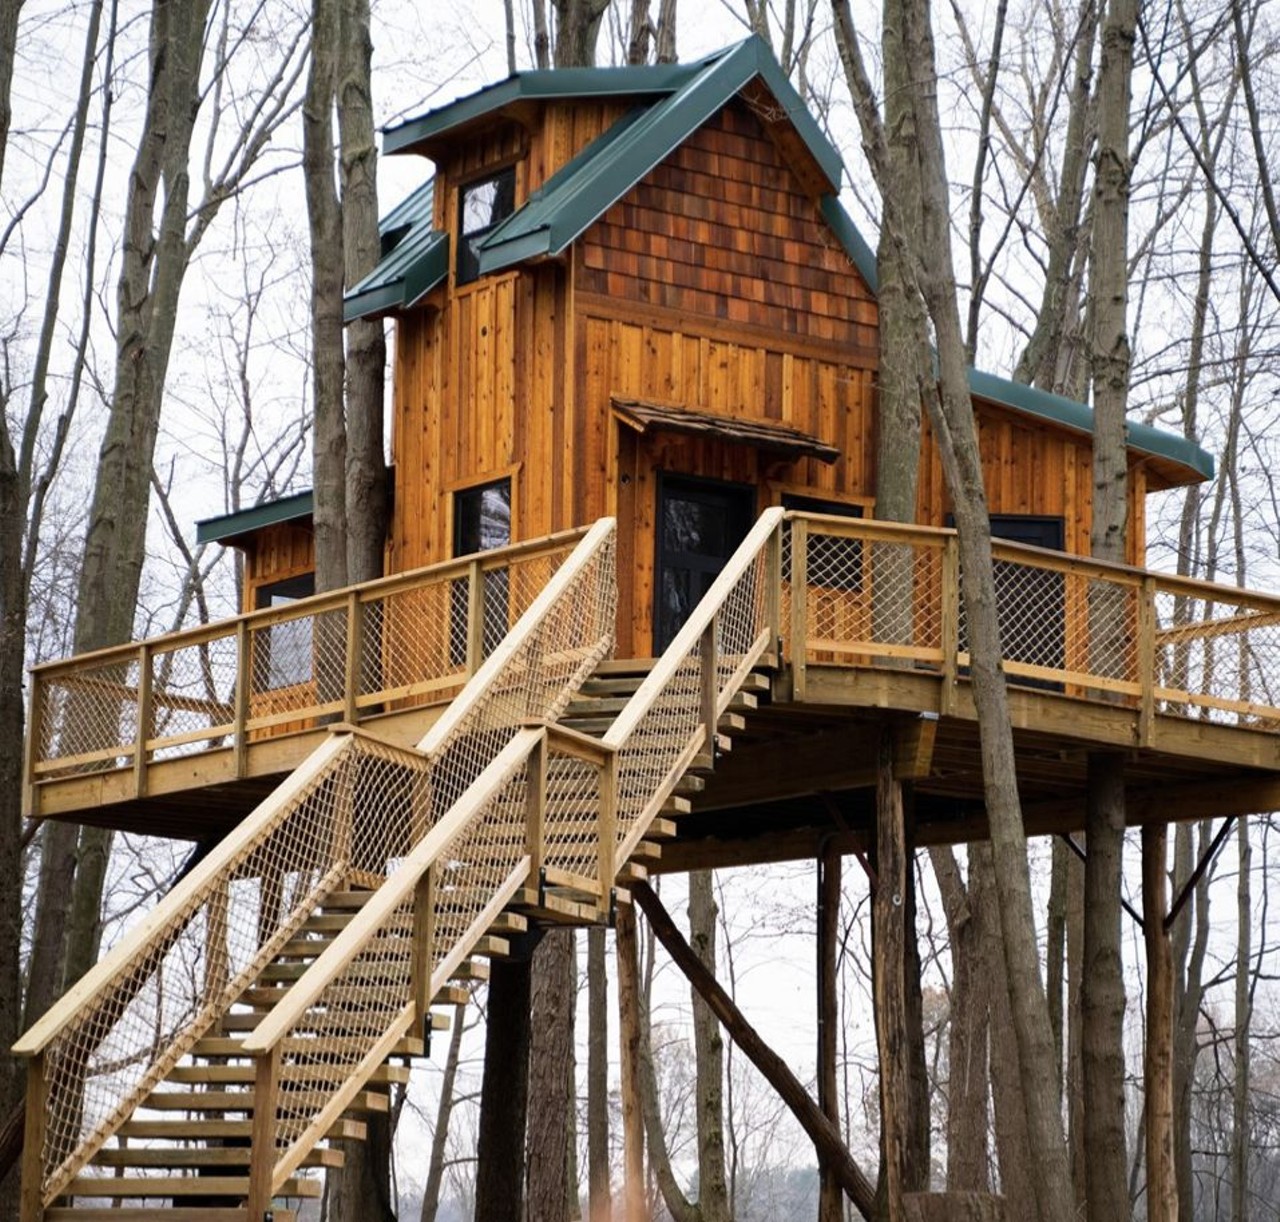  Cannaley Treehouse Village
Hocking Hills
Located in northwest Ohio, the Metroparks of Toledo will debut this gorgeous treehouse village in the summer of 2020. With four breathtaking treehouse cabins and beautiful surroundings, this is sure to be a popular tourist destination.
Photo via Metroparks Toledo/Facebook